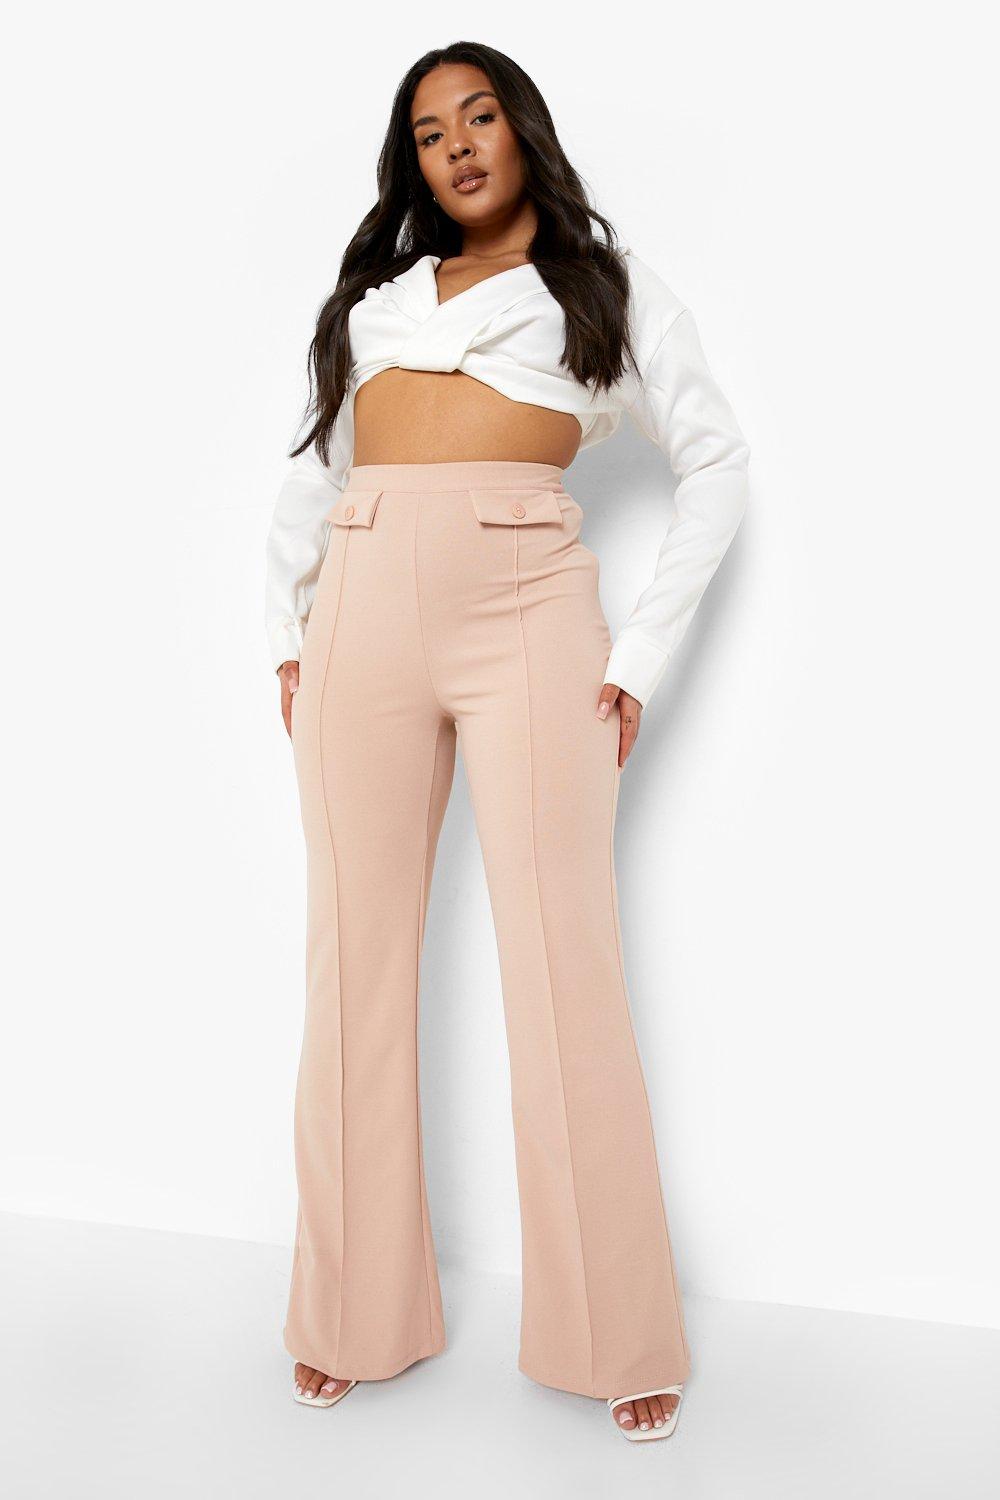 boohoo Plus Button High Waisted Wide Leg Pants - Beige - Size 22